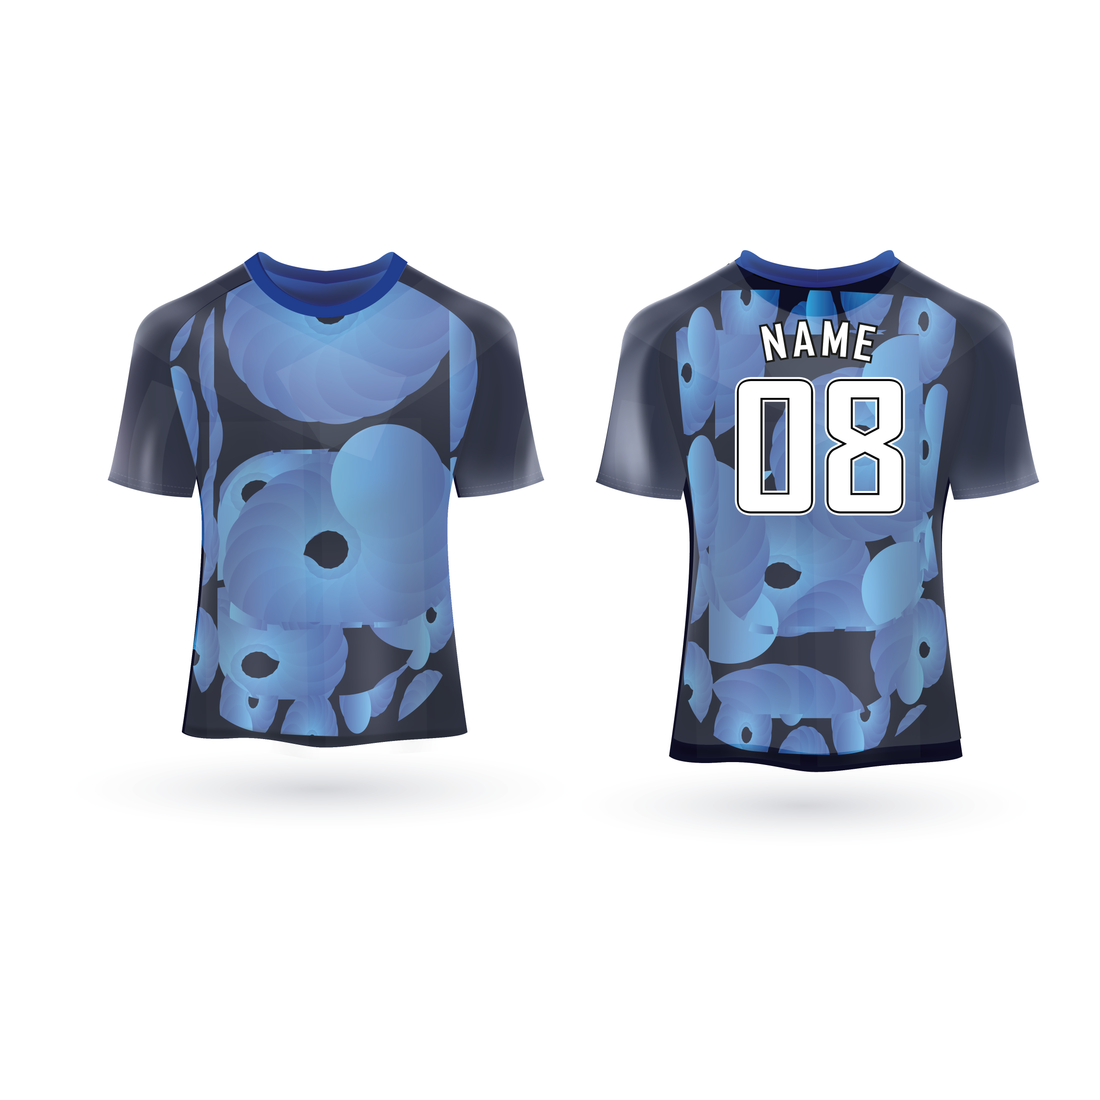 NEXT PRINT All Over Printed Customized Sublimation T-Shirt Unisex Sports Jersey Player Name & Number, Team Name NP50000288